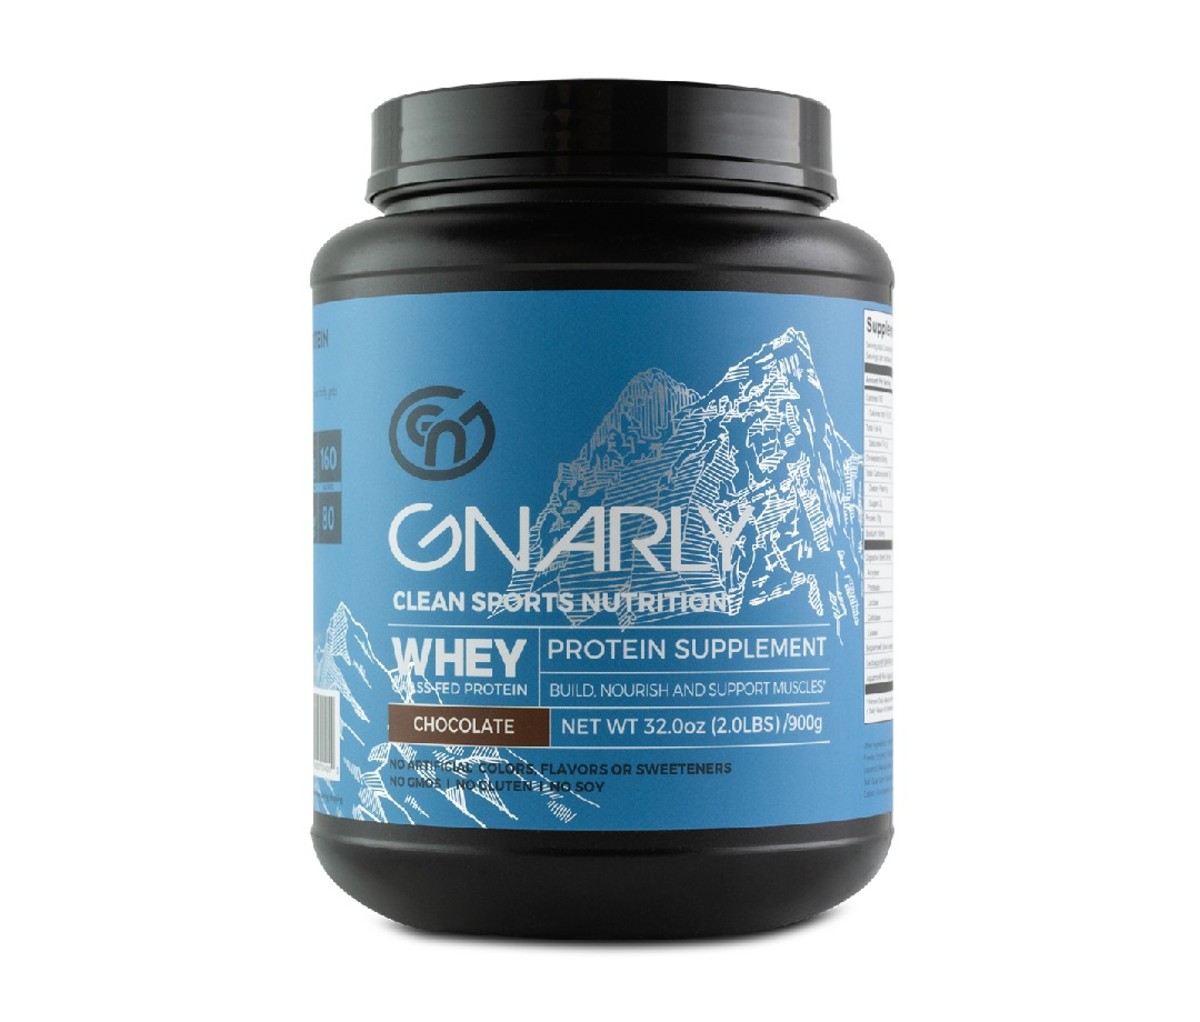 32 oz container of Gnarly Whey protein powder